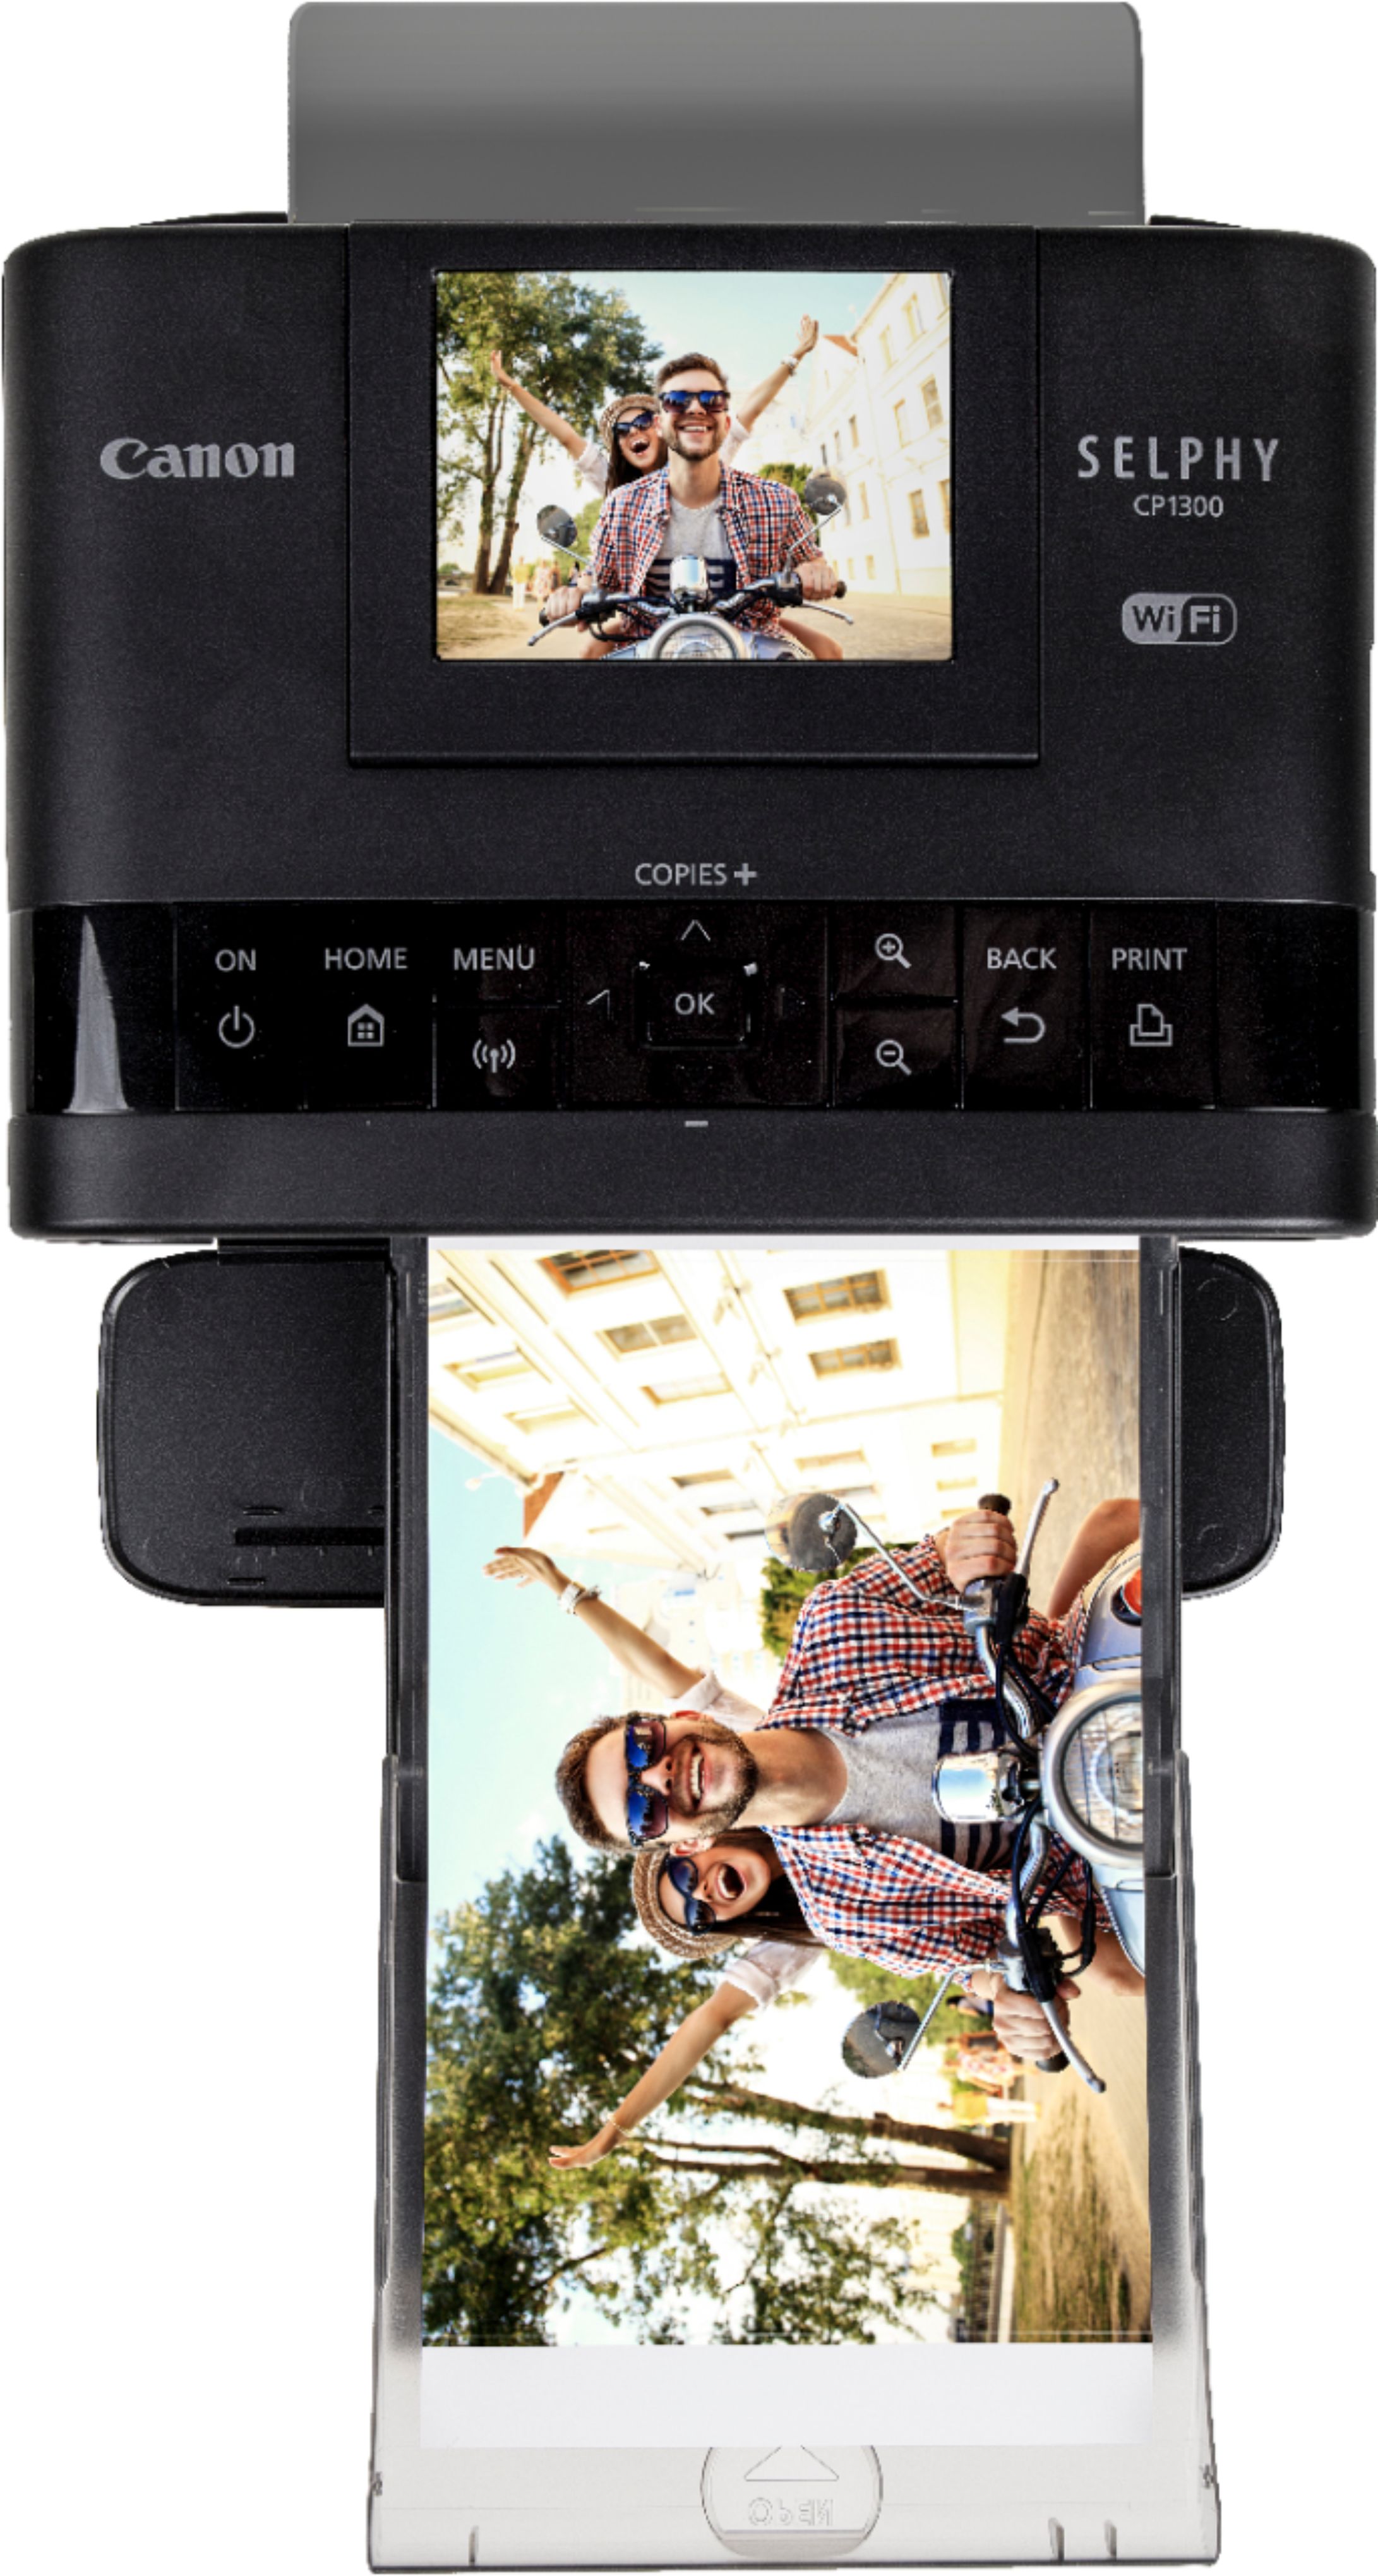 SELPHY CP1300 - Support - Download drivers, software and manuals